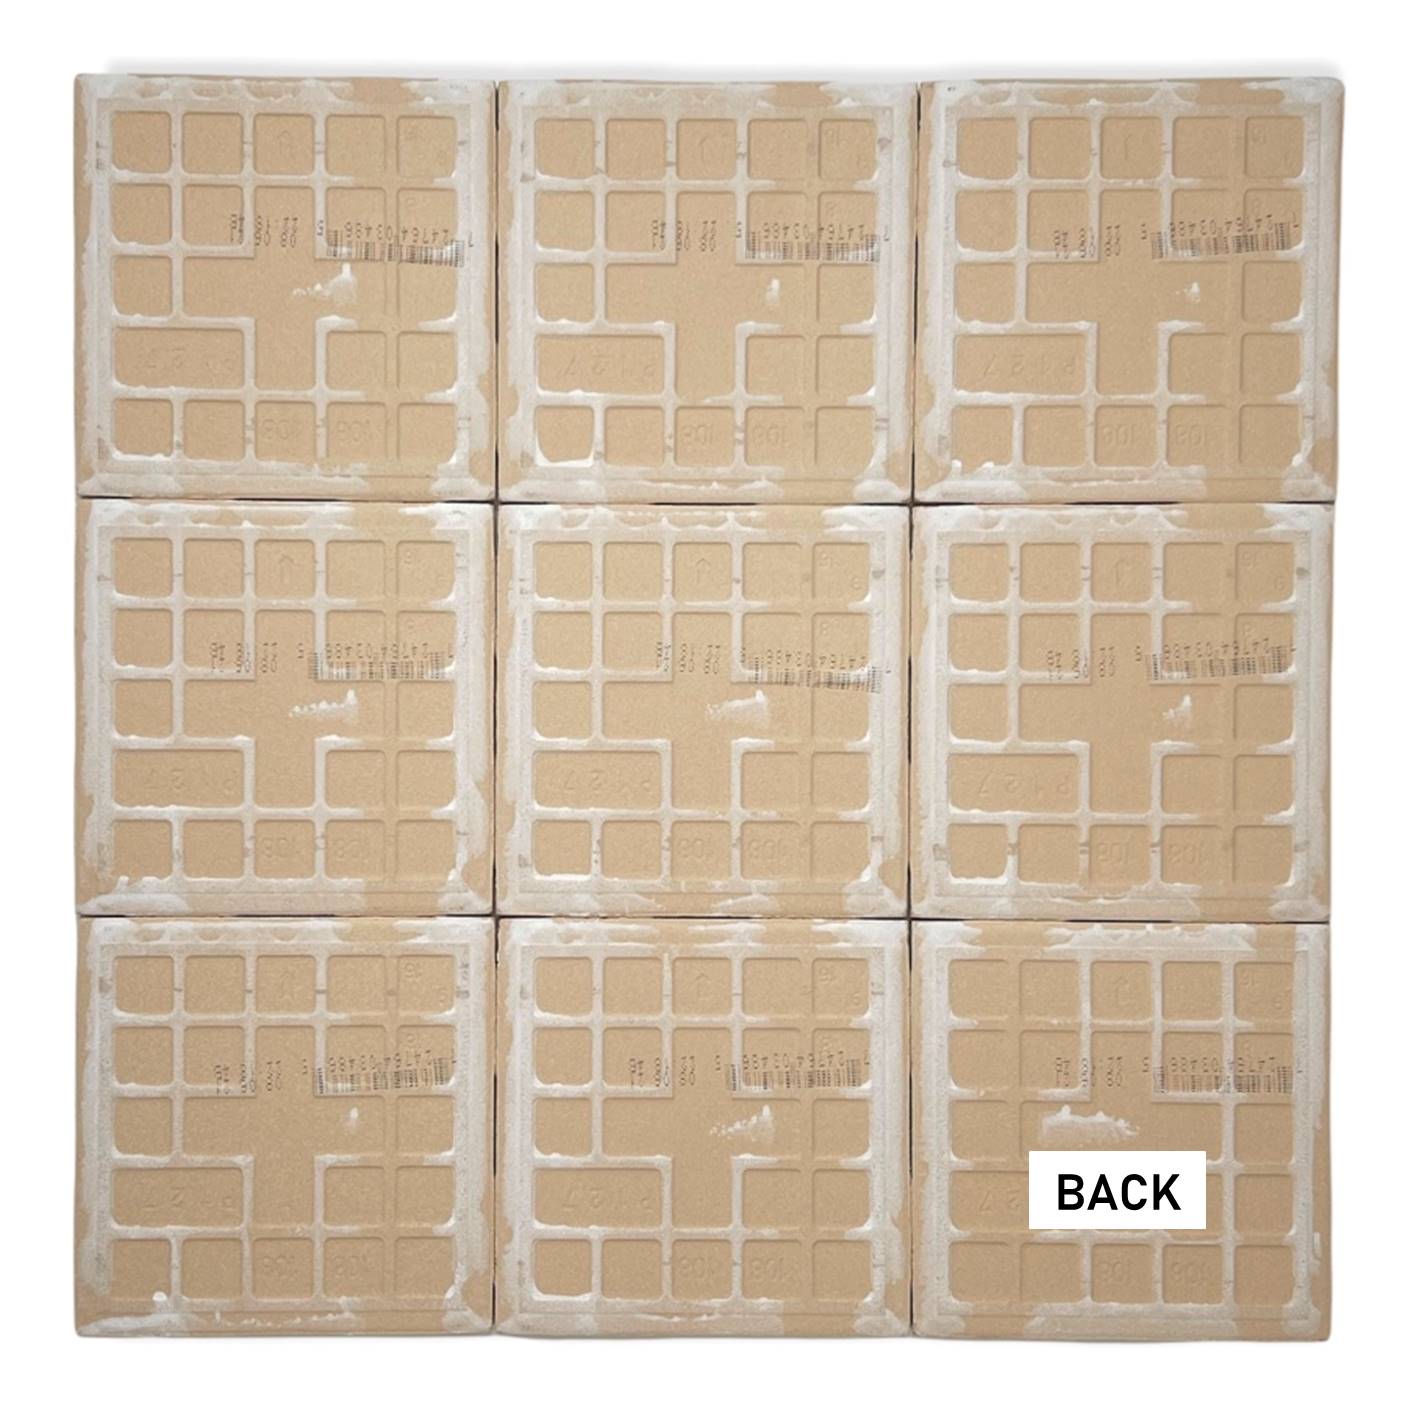 4 in White Ceramic Tile Gloss 4 1/4" Box of 10 Piece for Bathroom Wall and Kitchen Backsplash